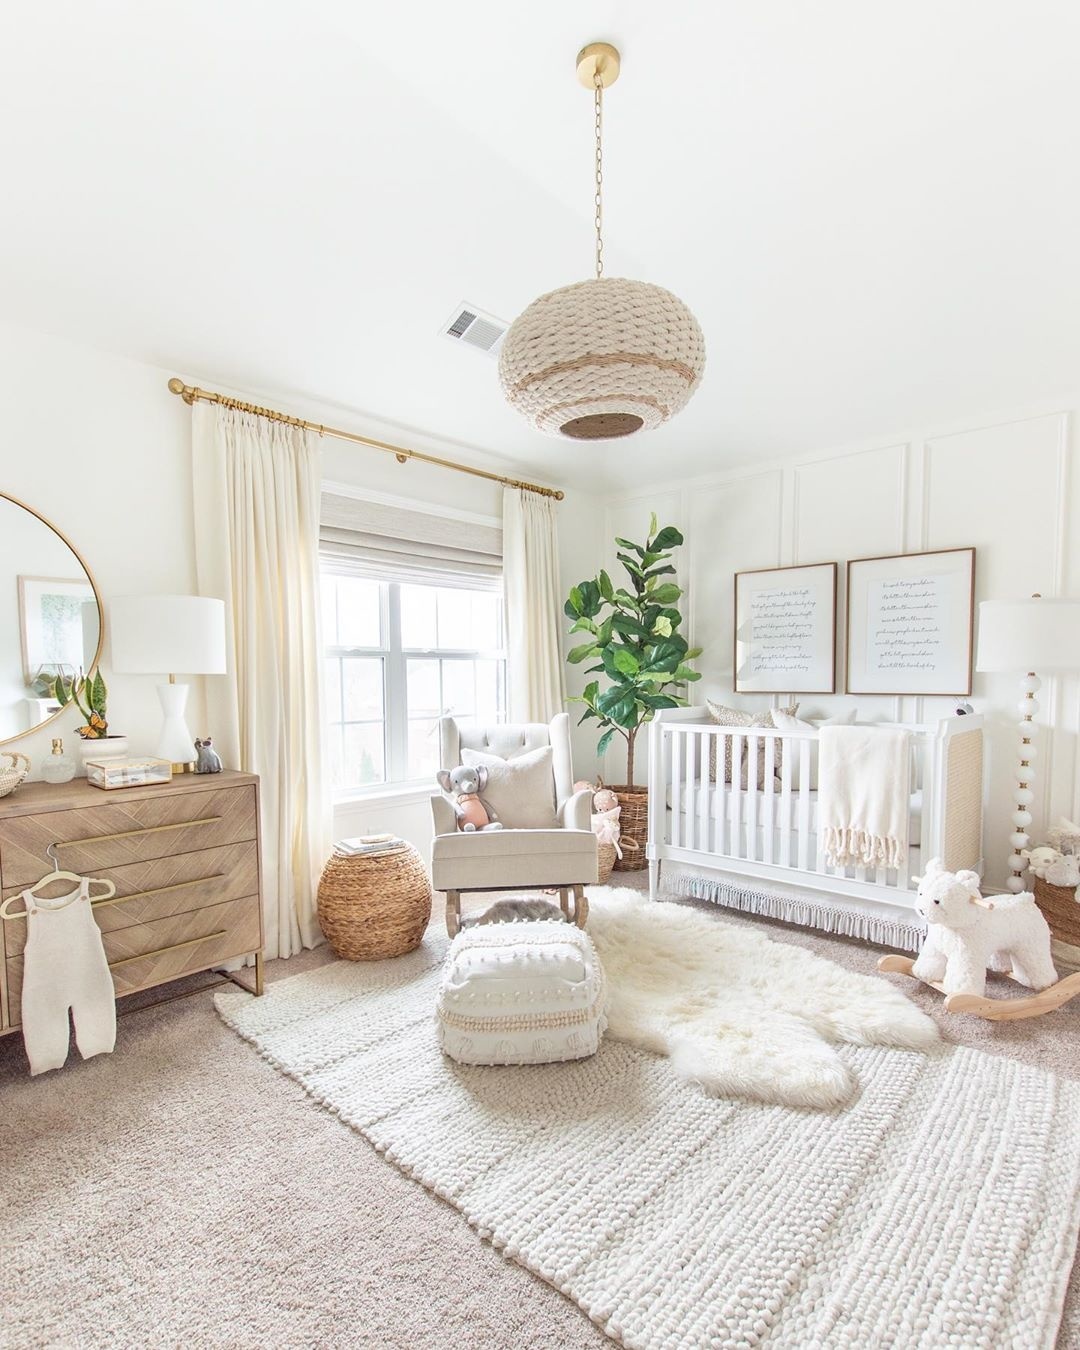 How To Babyproofing Your Home Room By Room - Almost Mom